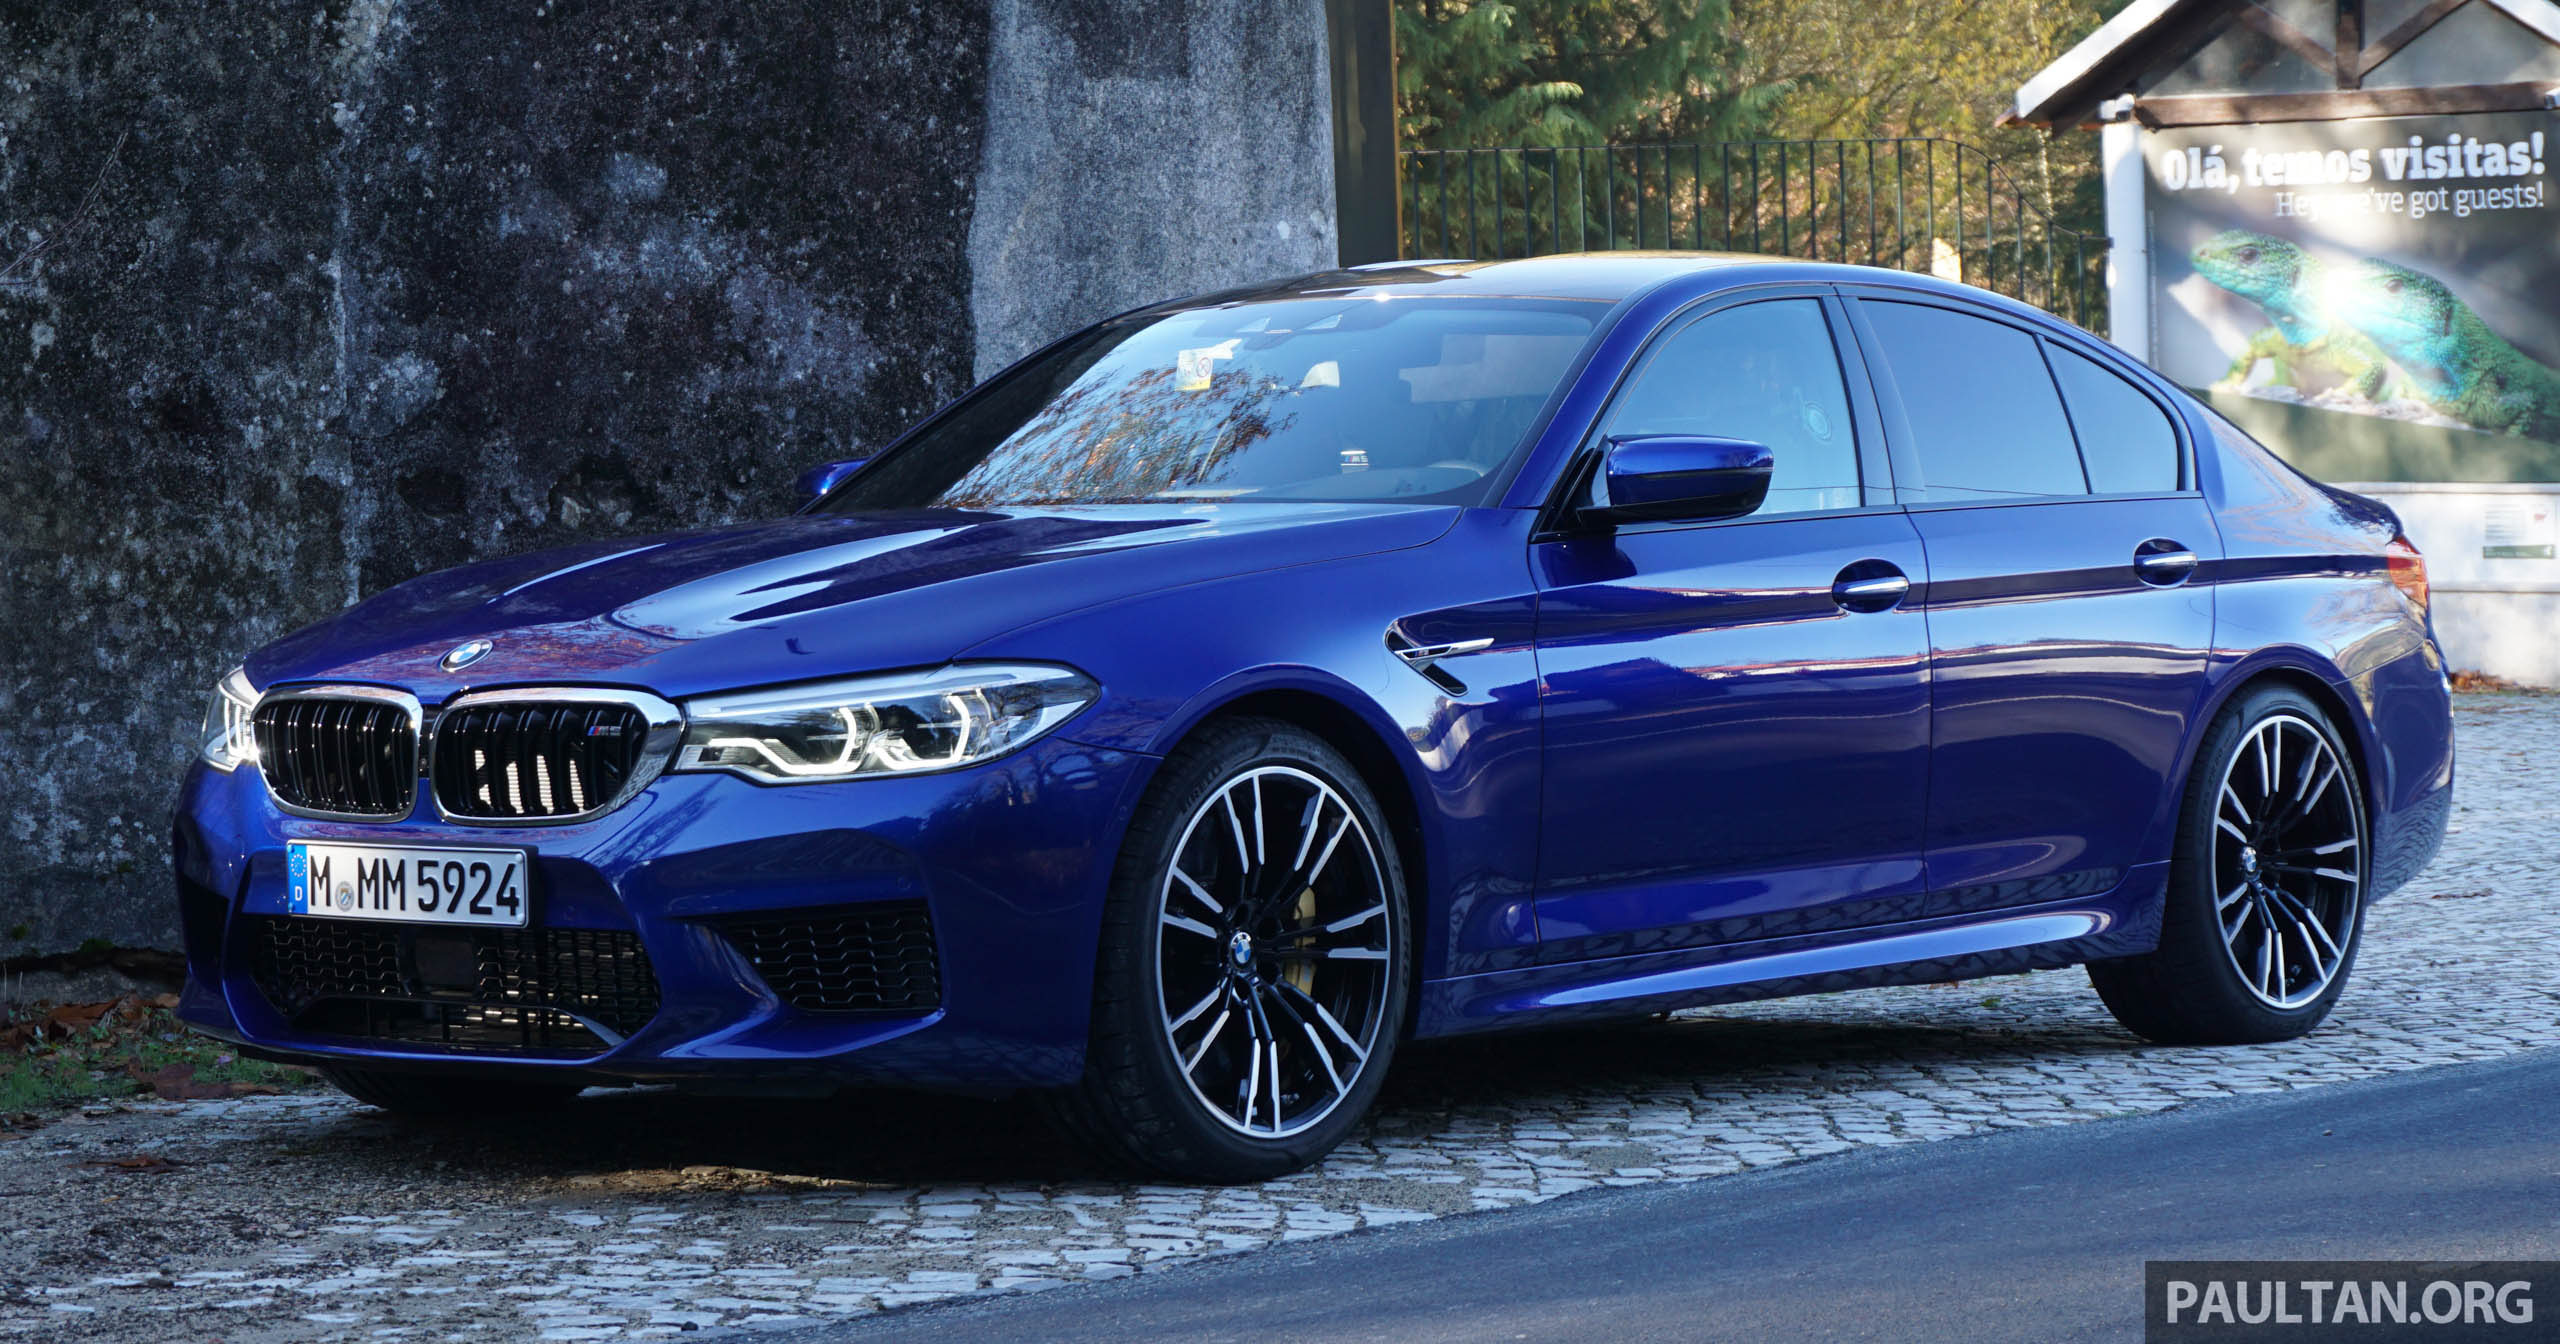 Driven: F90 Bmw M5 Review – The Quintessential - Paultan.Org